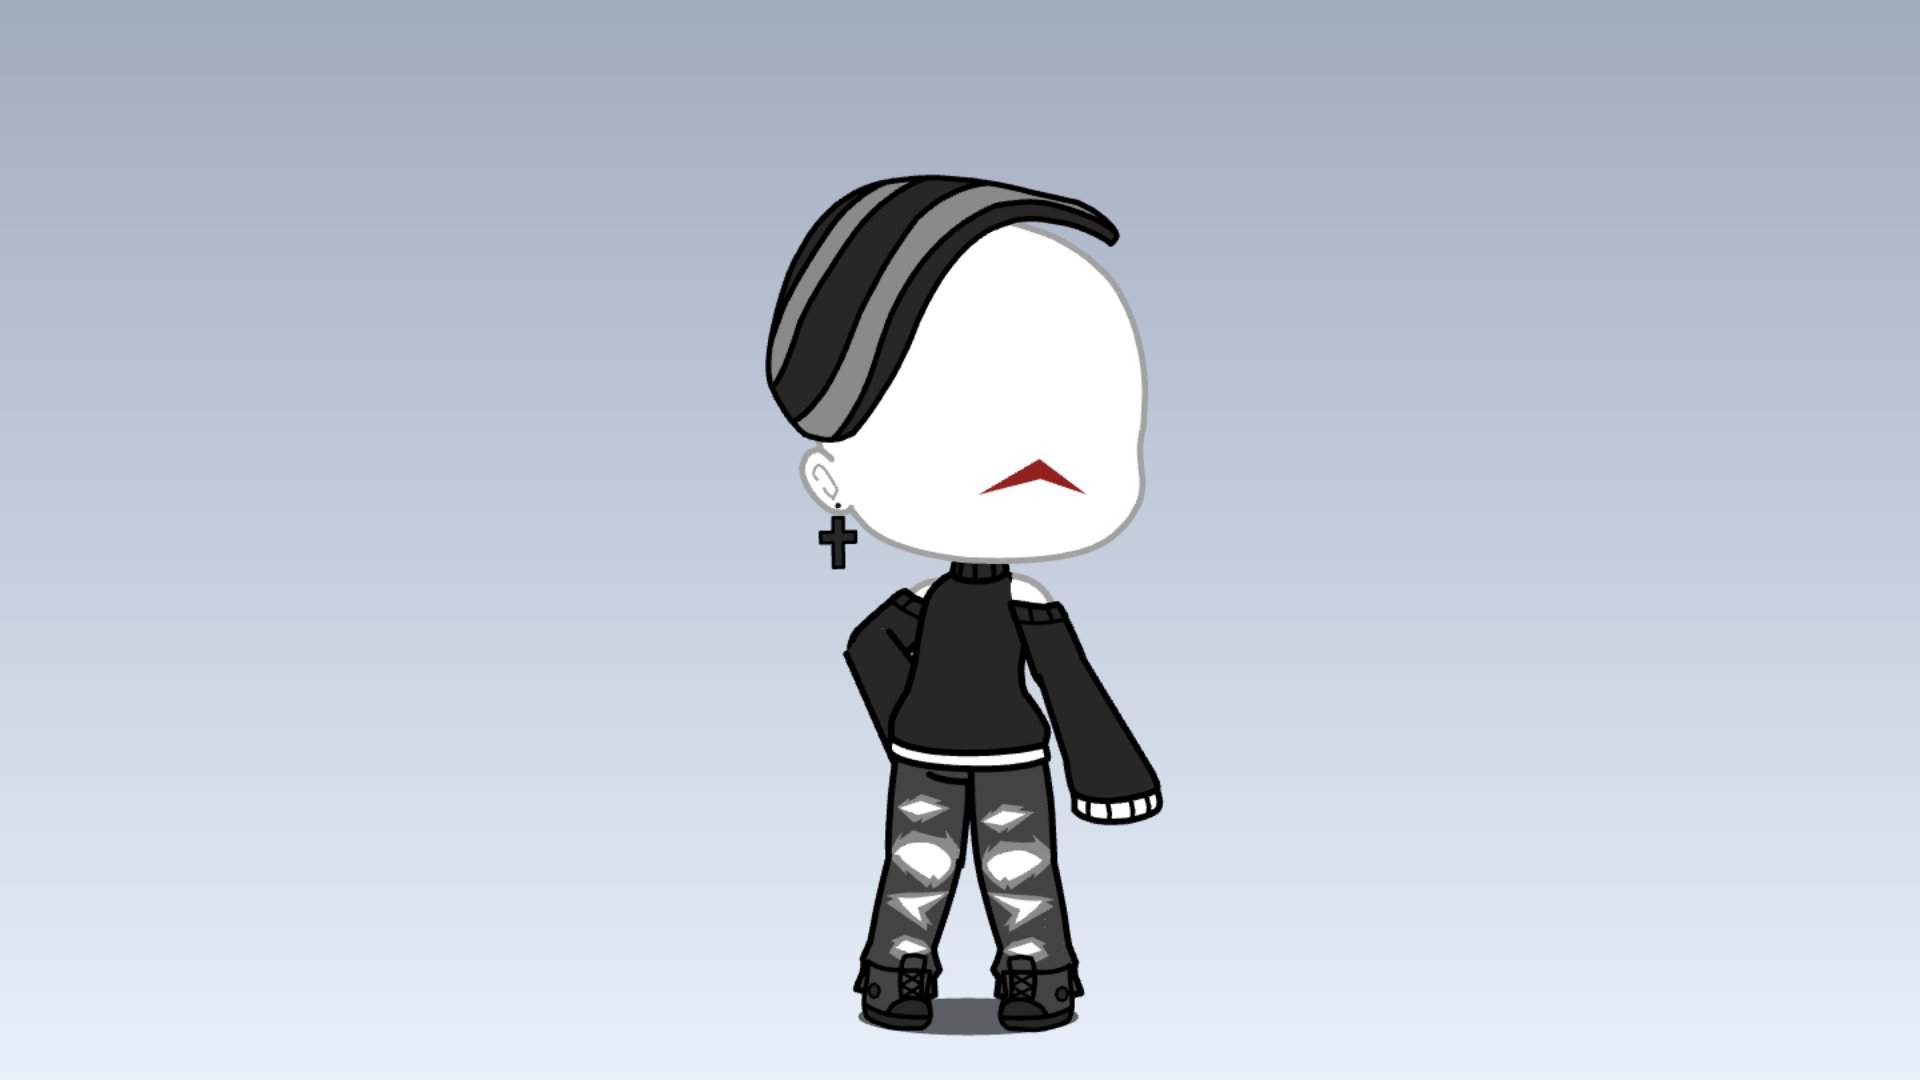 Black Outfit Gacha Life Outfit Ideas Boy